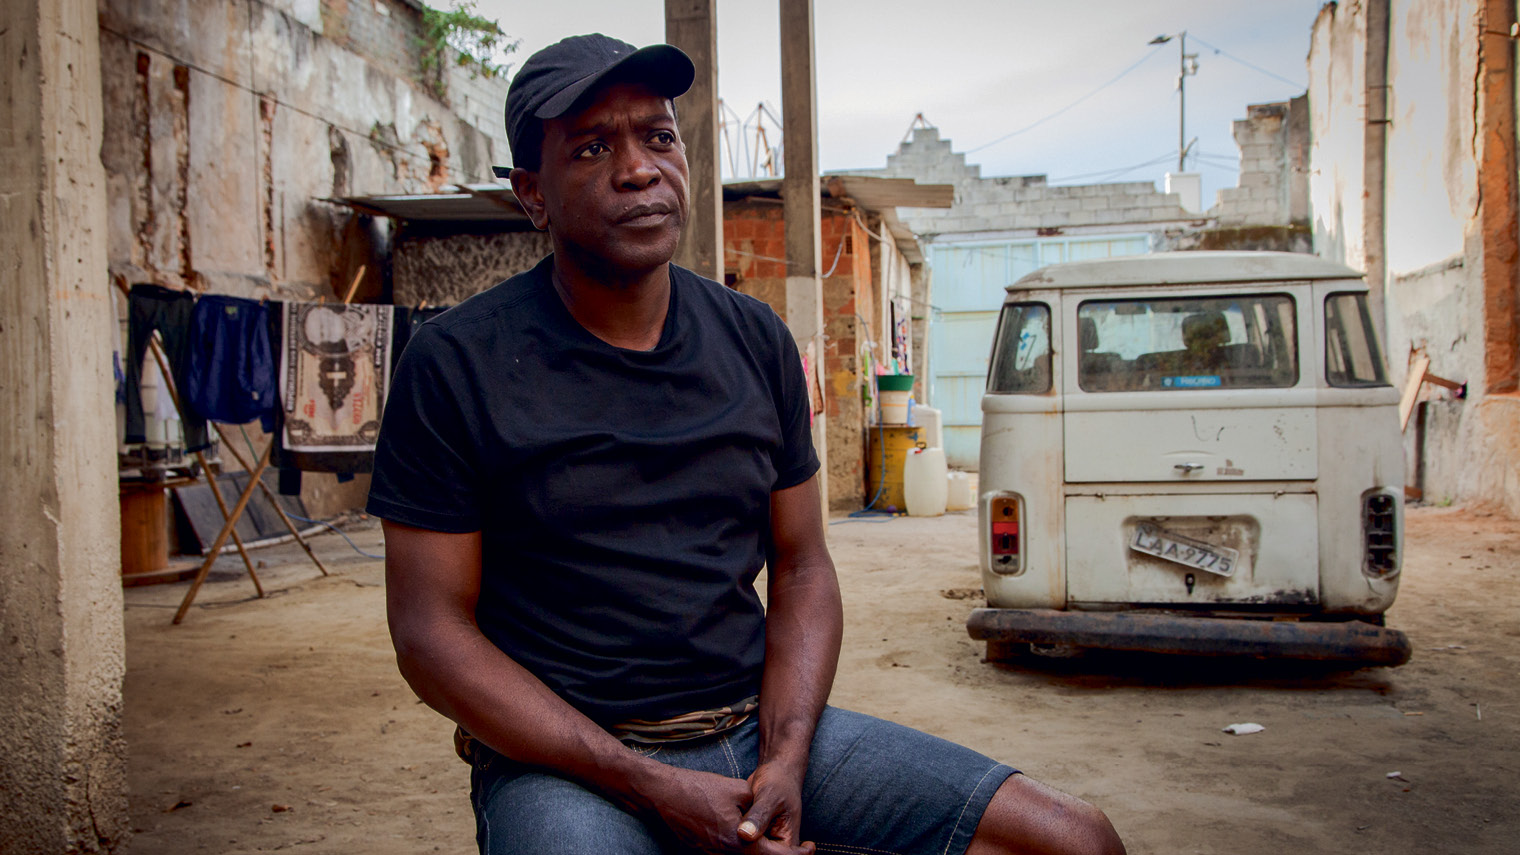 Roberto Gomes dos Santos, 49, used to live in a squat called “Quilombo das Guerreiras” that him and 120 families had occupied for seven years. They were all evicted in 2013 as buildings were cleared for the Trump Towers Rio development